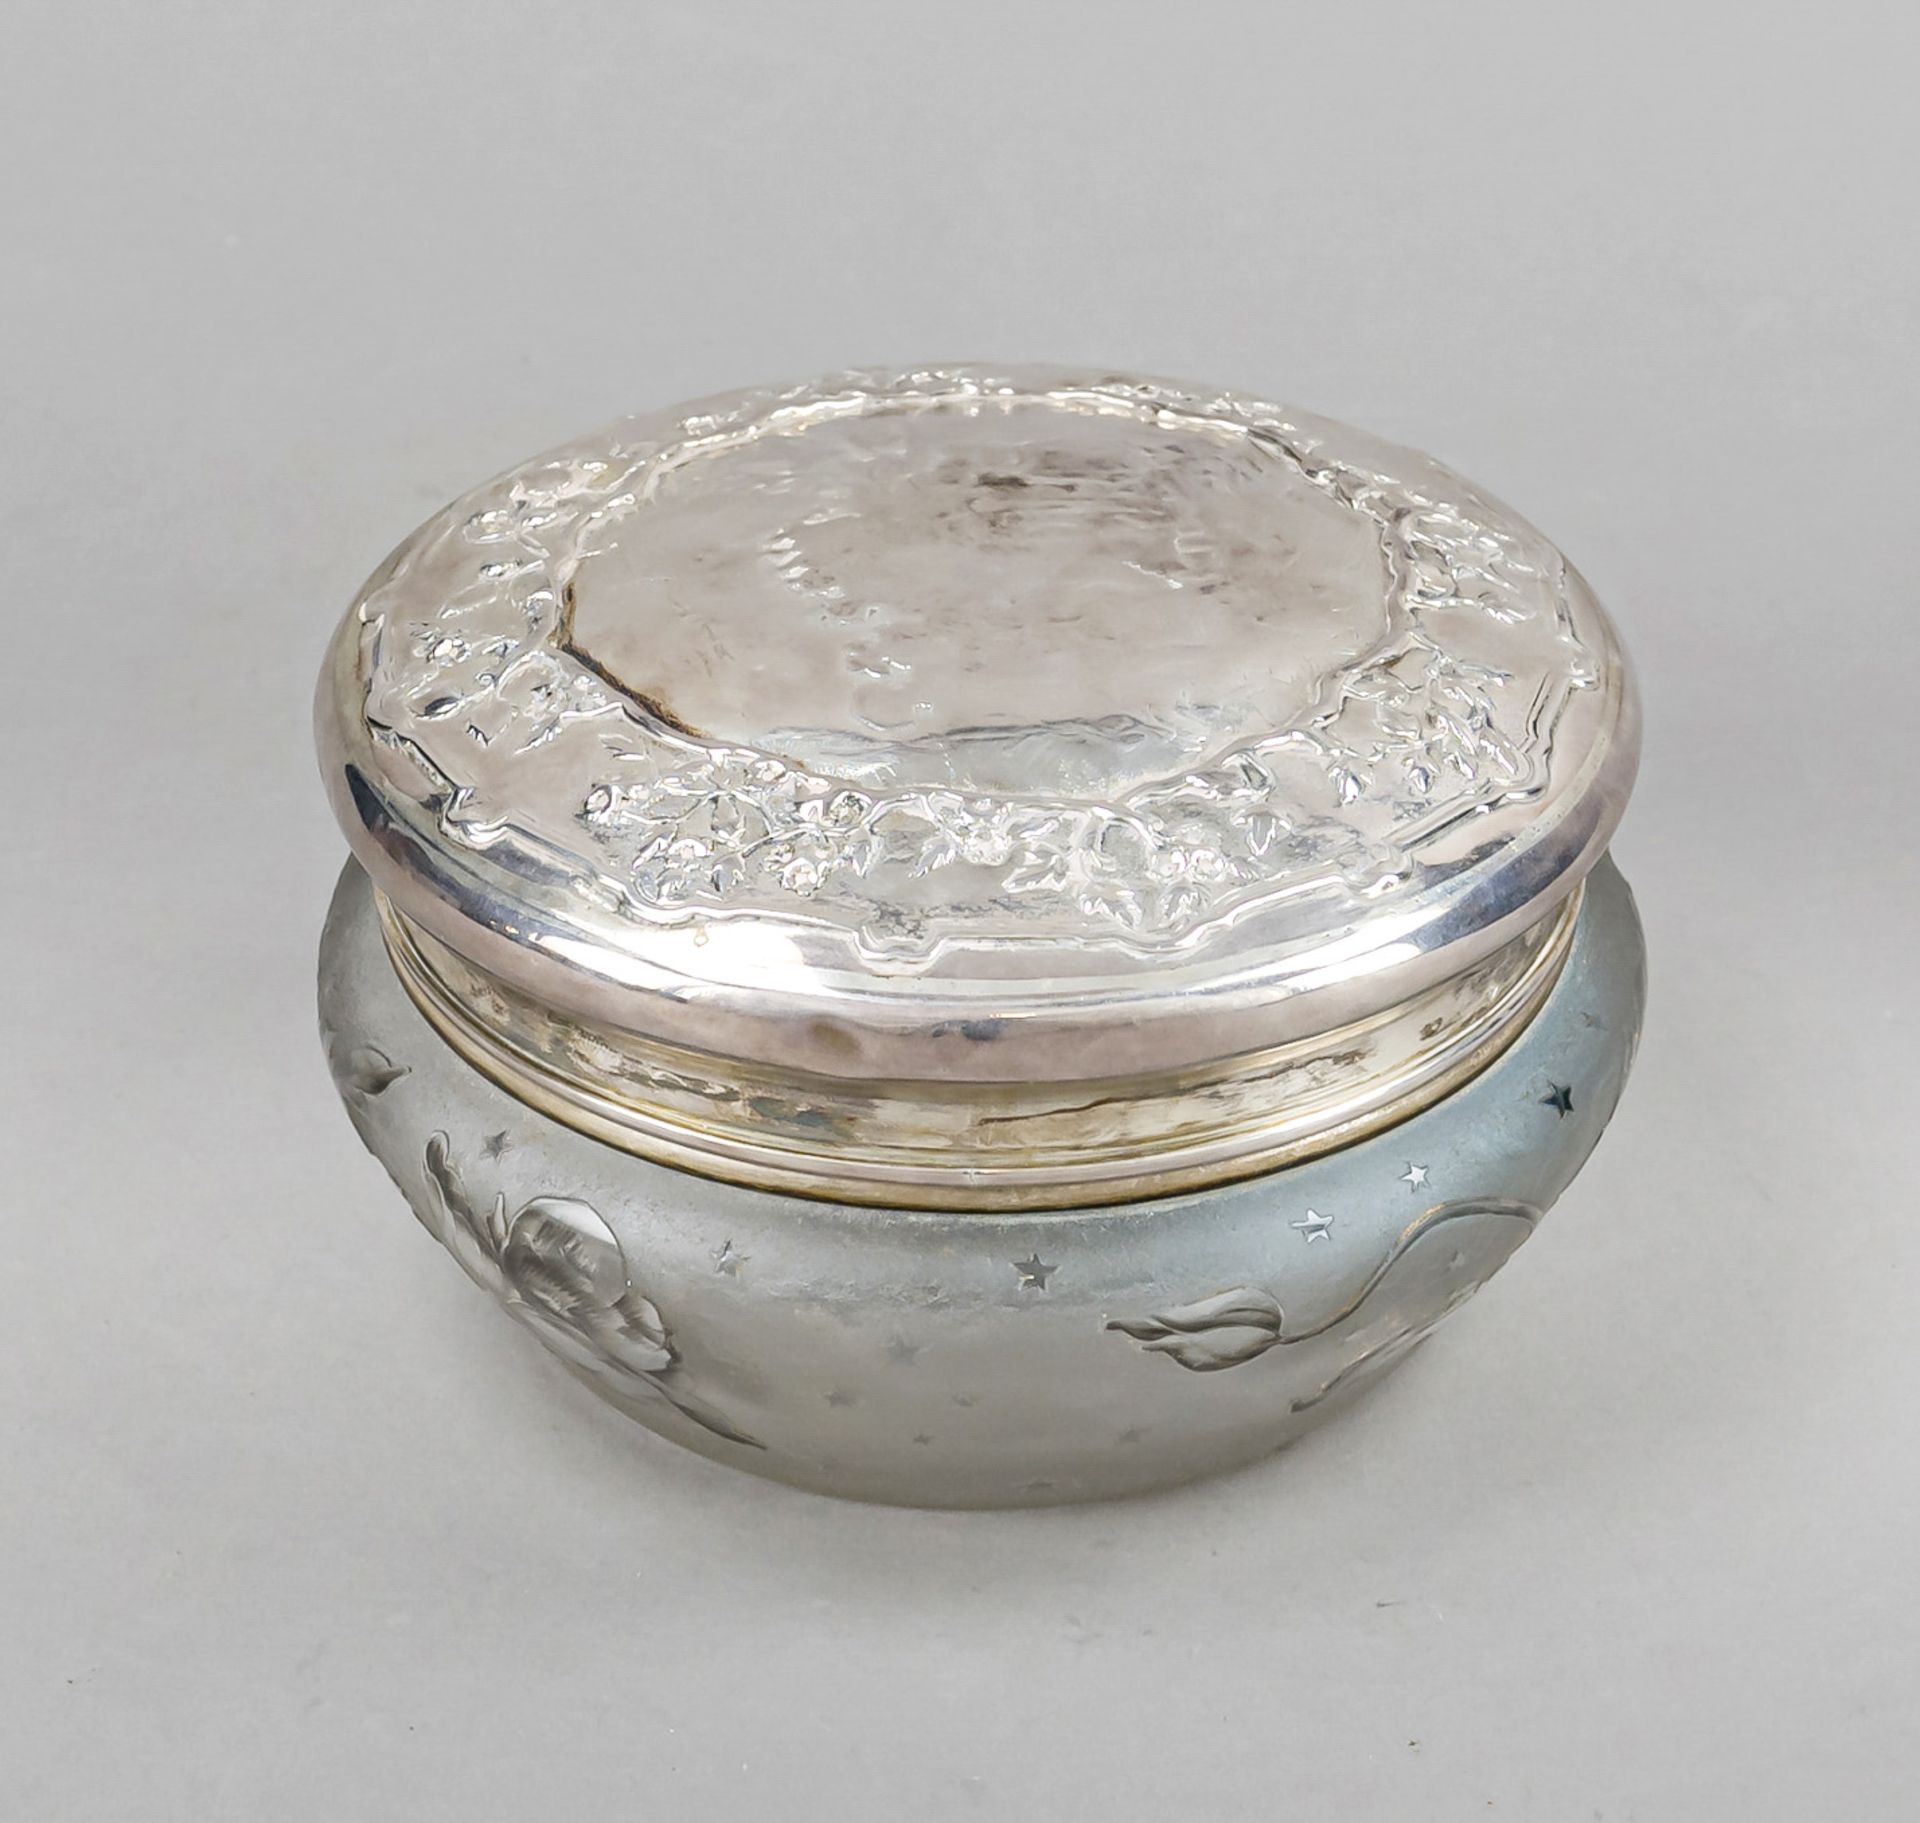 Round Art Nouveau box with silver lid, France, c. 1900, Daum body, Nancy, round base, conical body